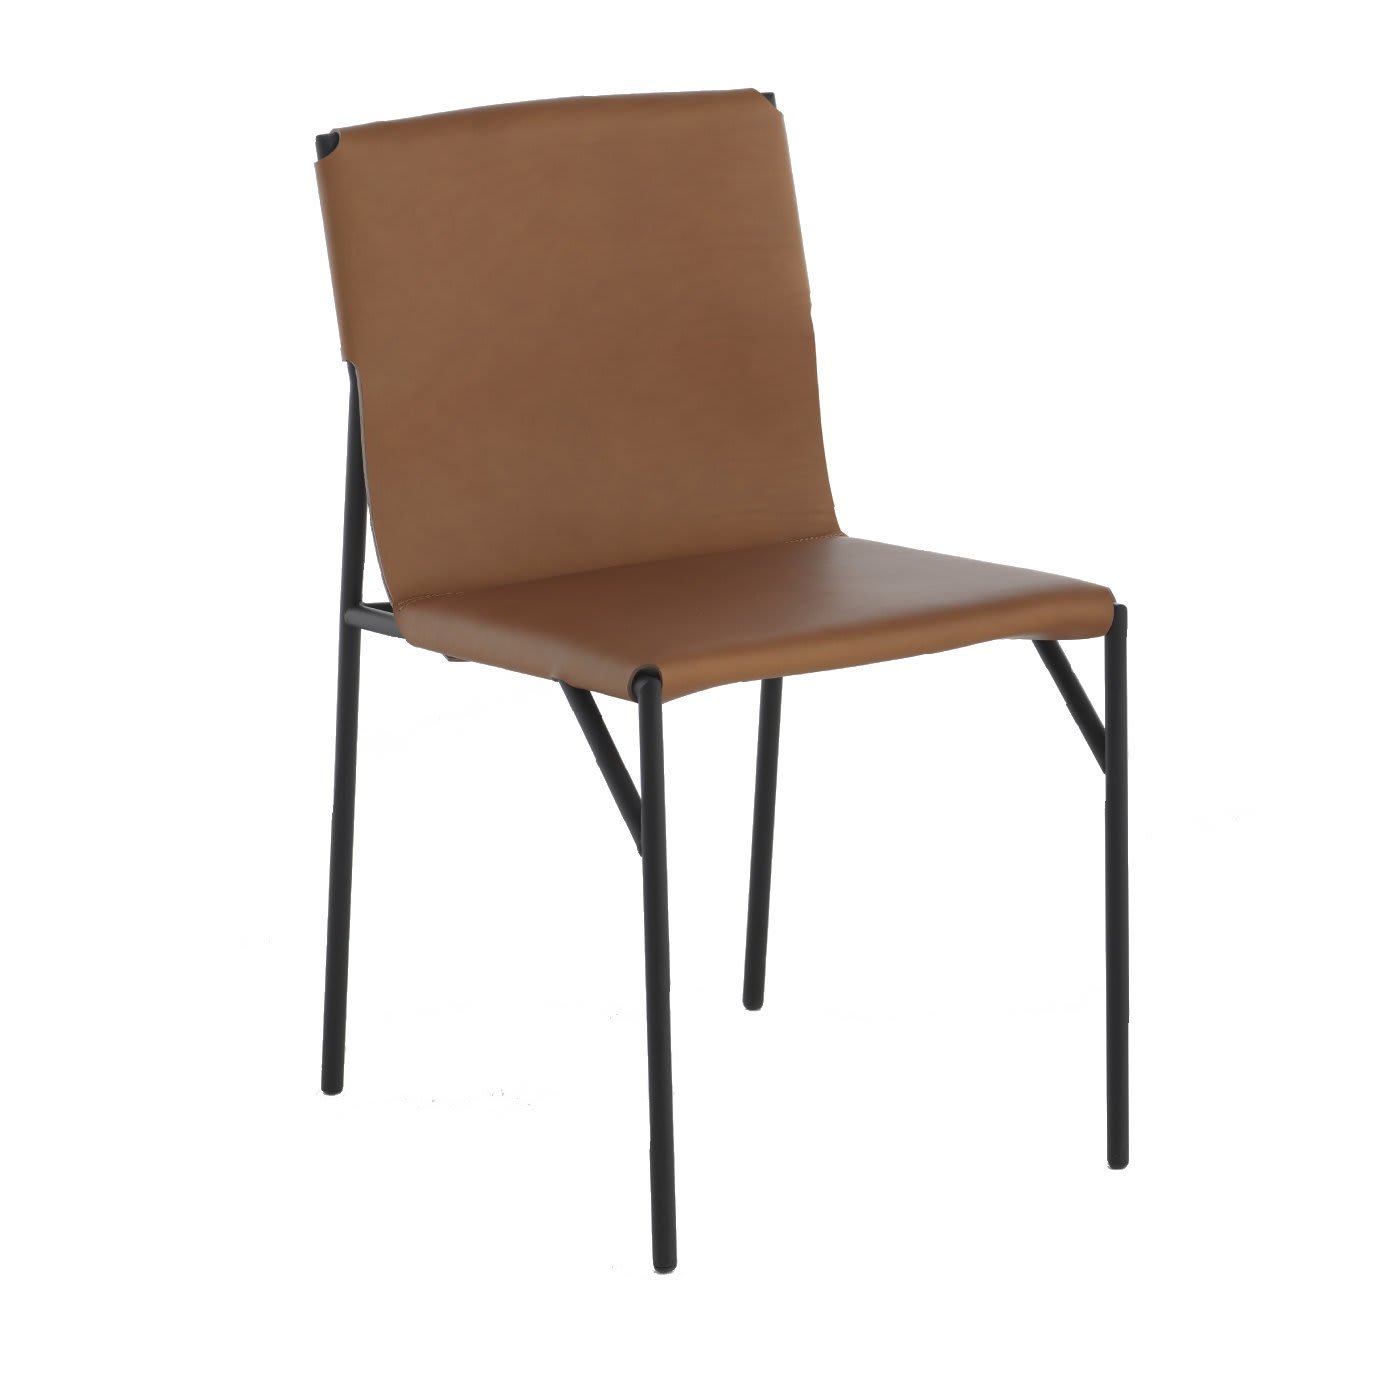 Tout Le Jour Natural Leather Chair by Marc Thorpe - Horm